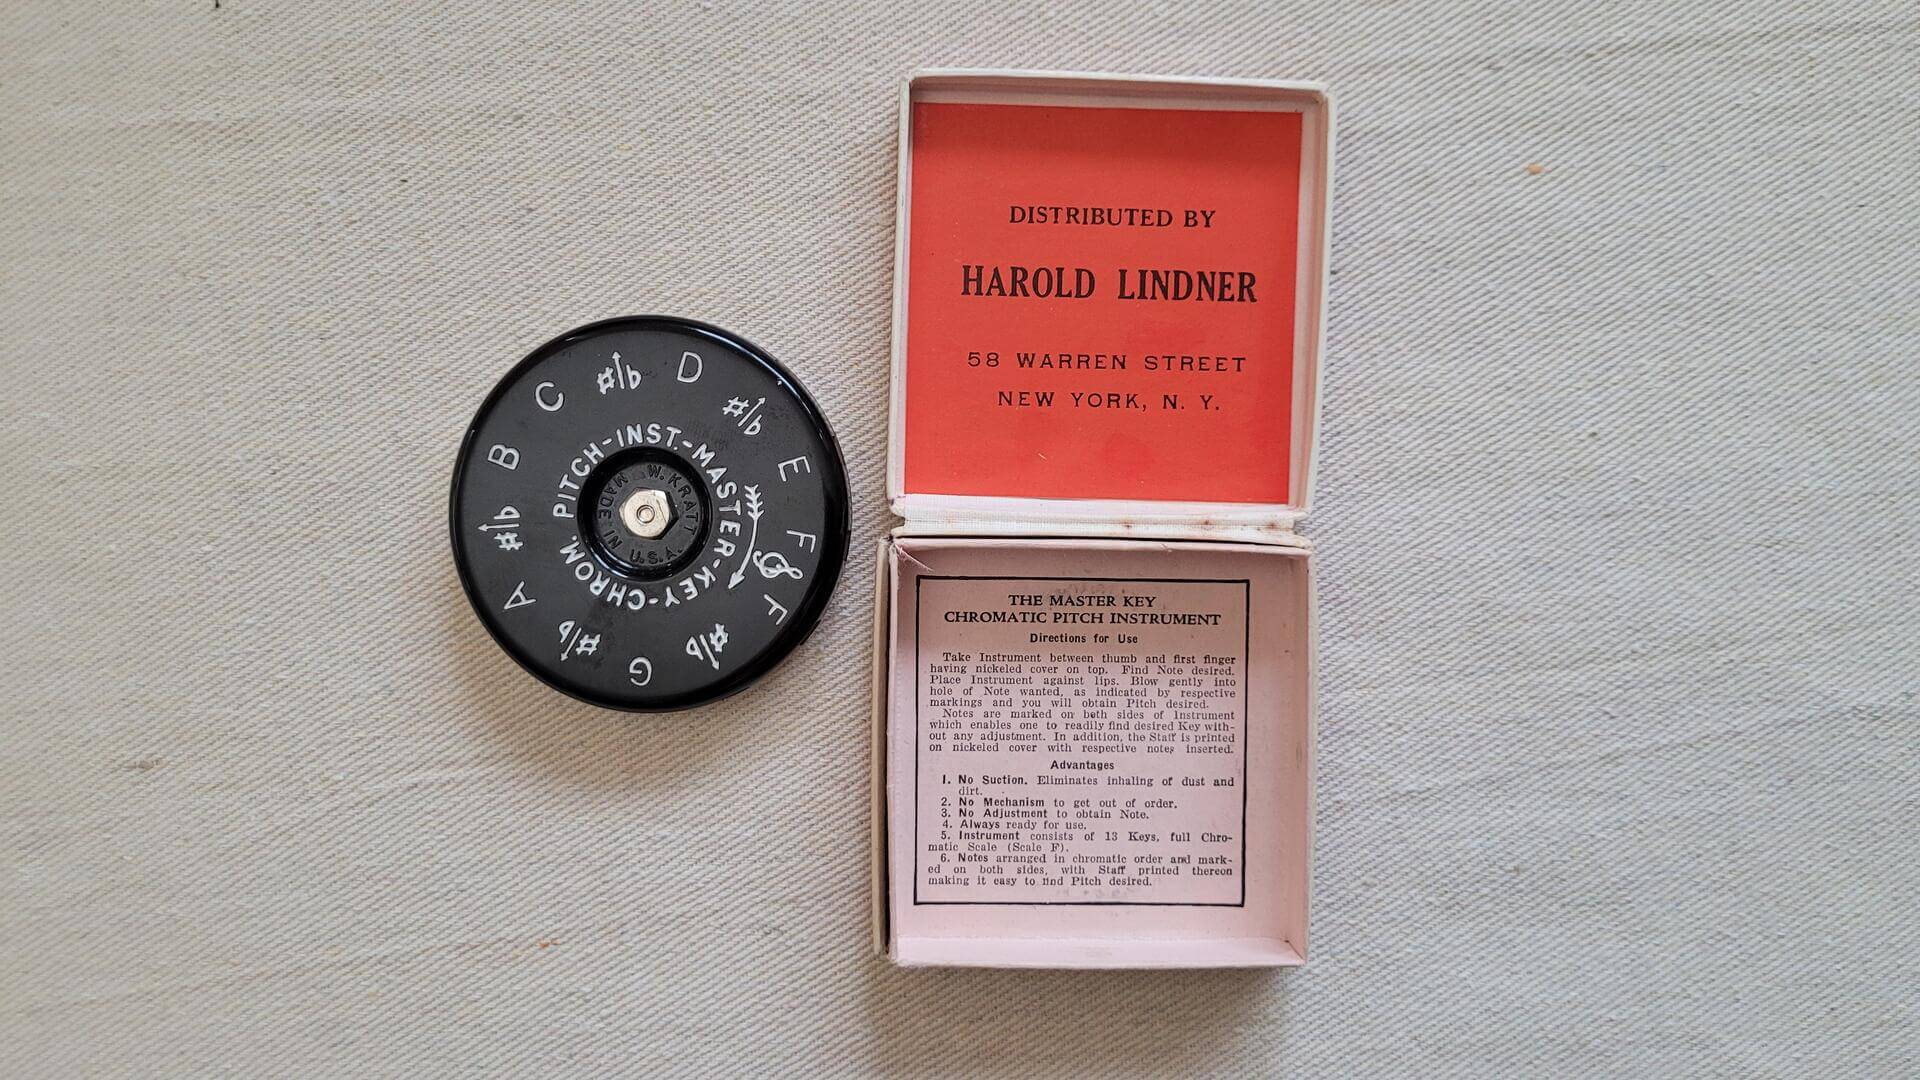 Vintage Linder 14 keys chromatic pitch pipe instrument model a-440 The Master Key by W. Kratt. Antique made in USA music tool and accessory with original red box and retro black and chrome metal design